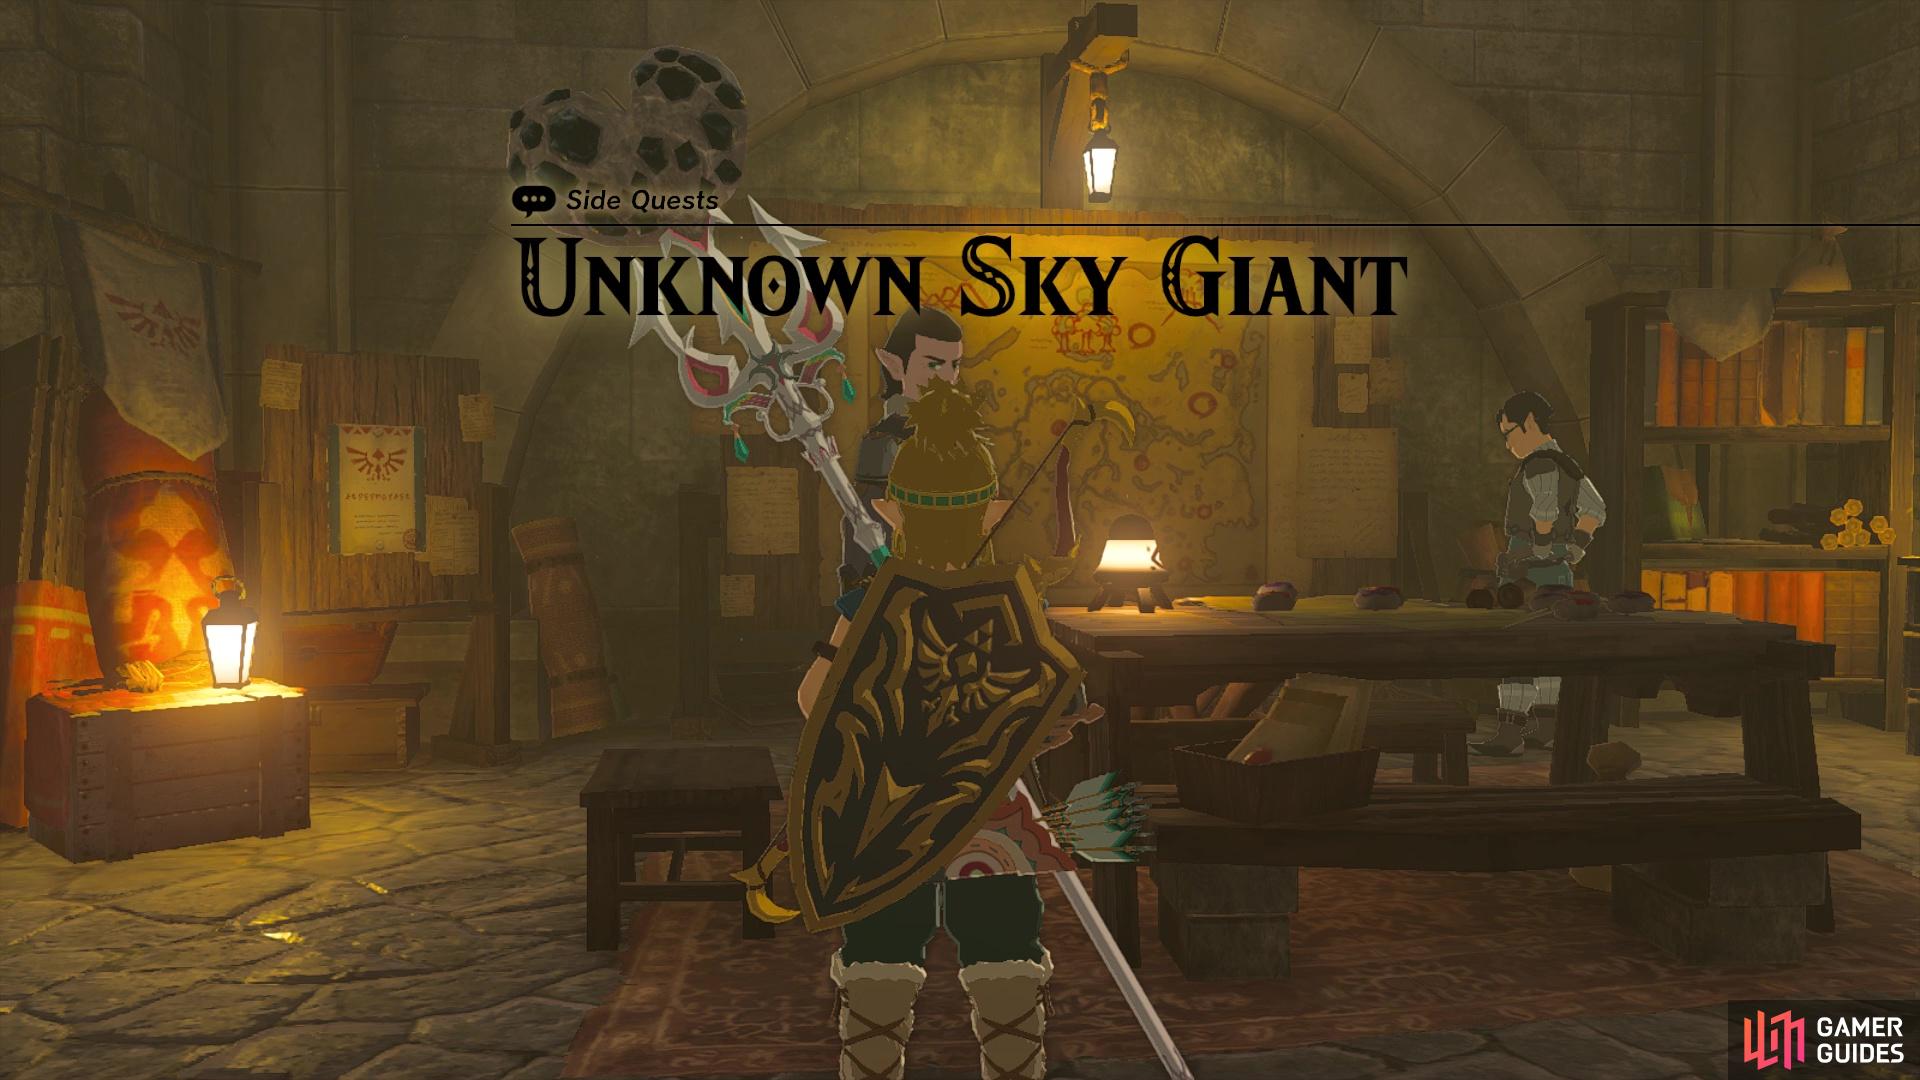 Unknown Sky Giant is part of the second set of monster elimination quests.